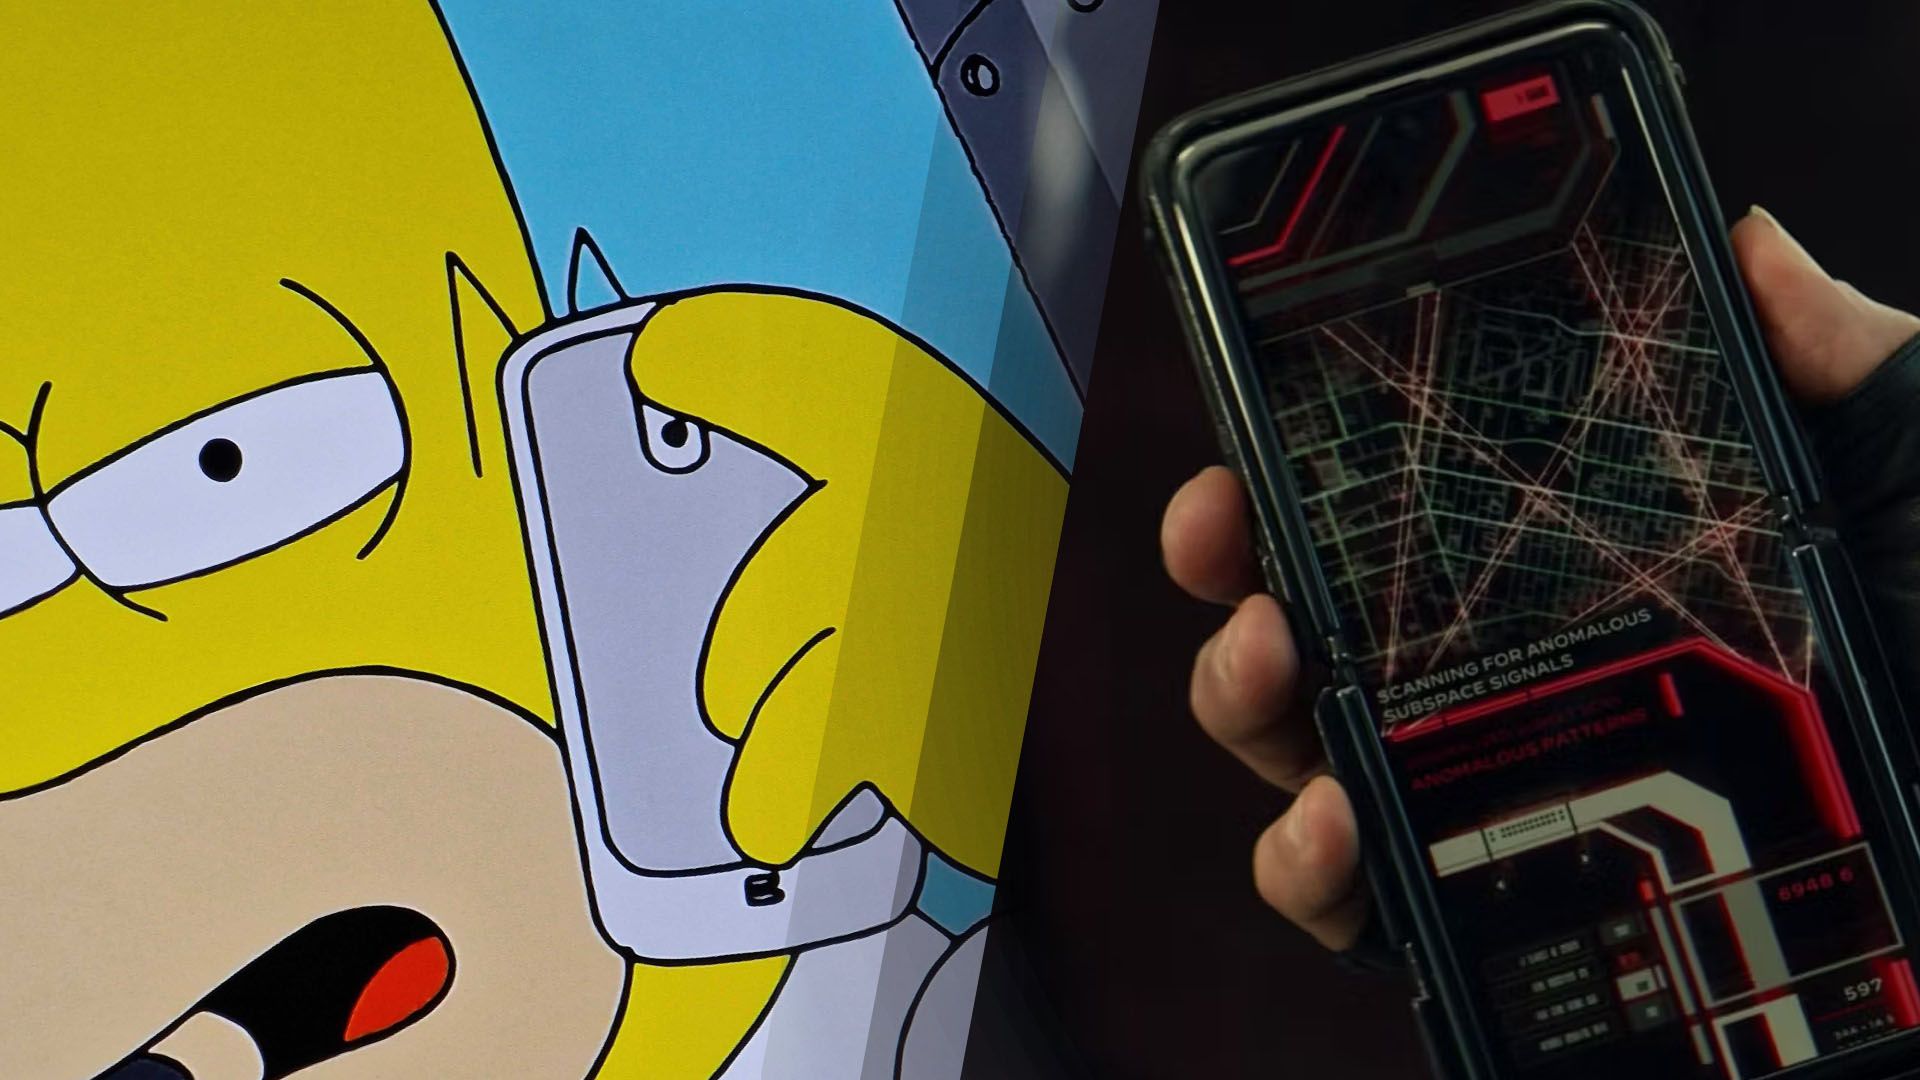 Homer Simpson holding a Galaxy Nexus and a Galaxy Flip foldable used in sci-fi